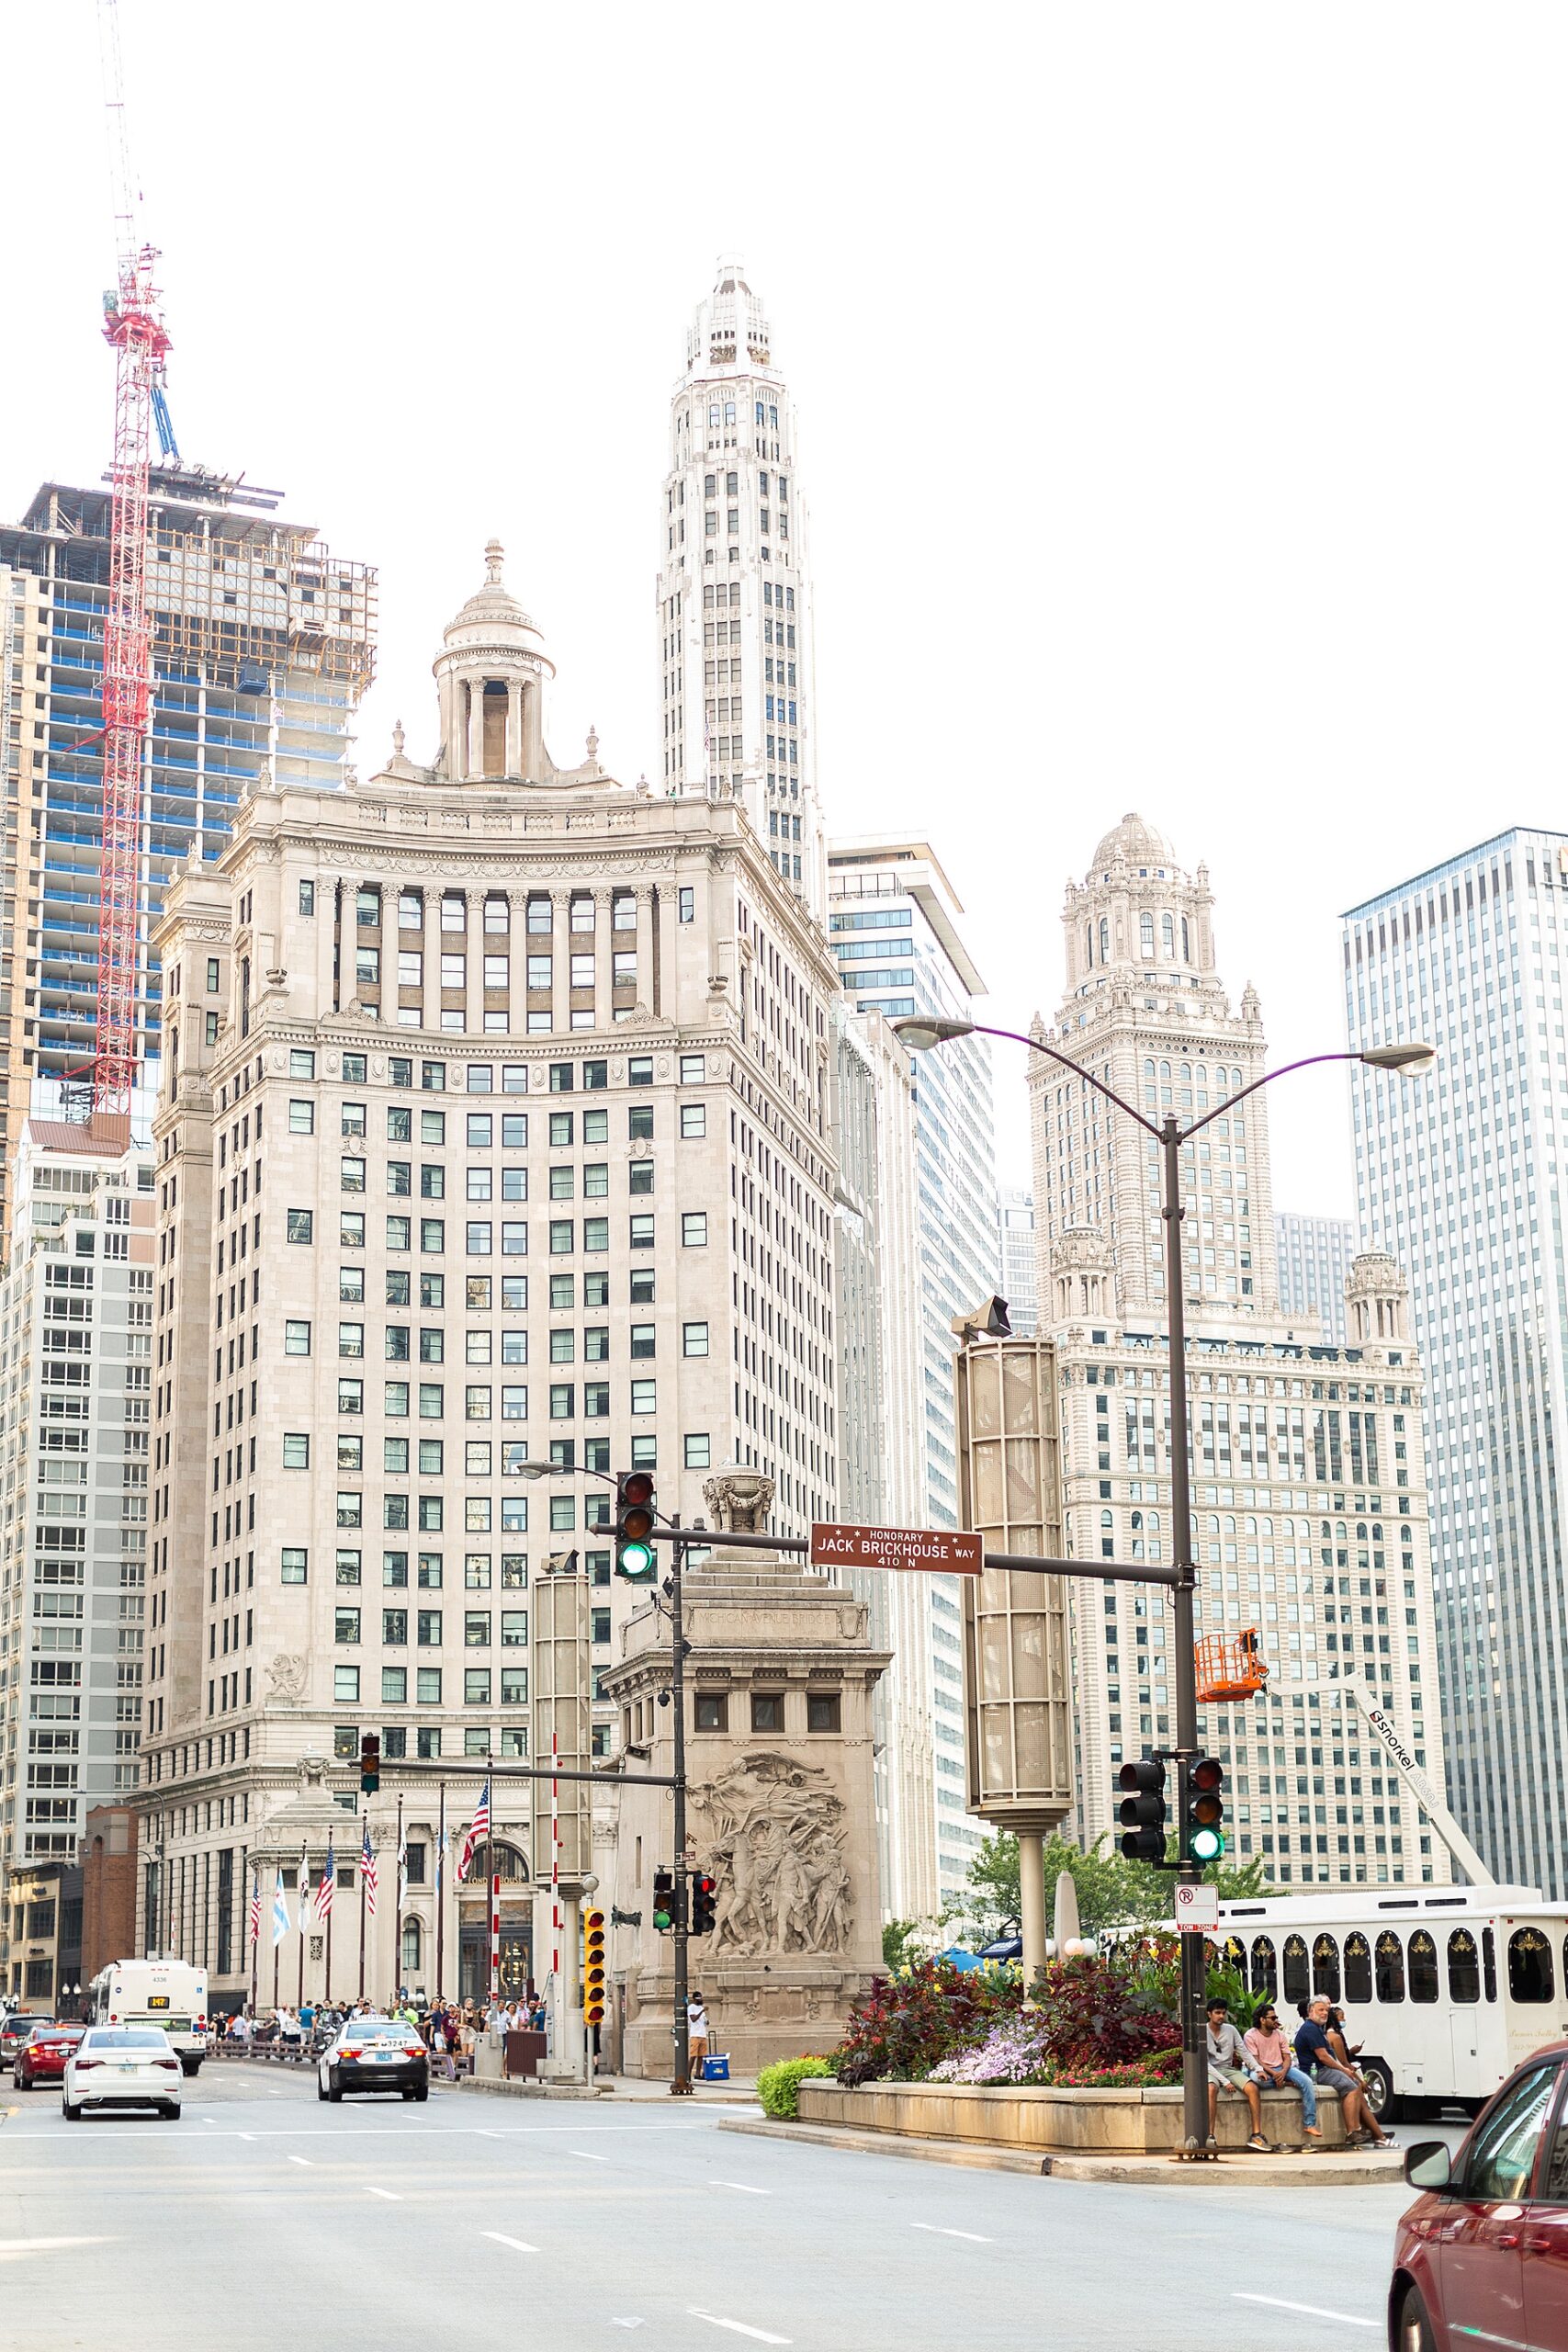 Chicago wedding photographer shares advice on How to Choose the Right Wedding Photographer